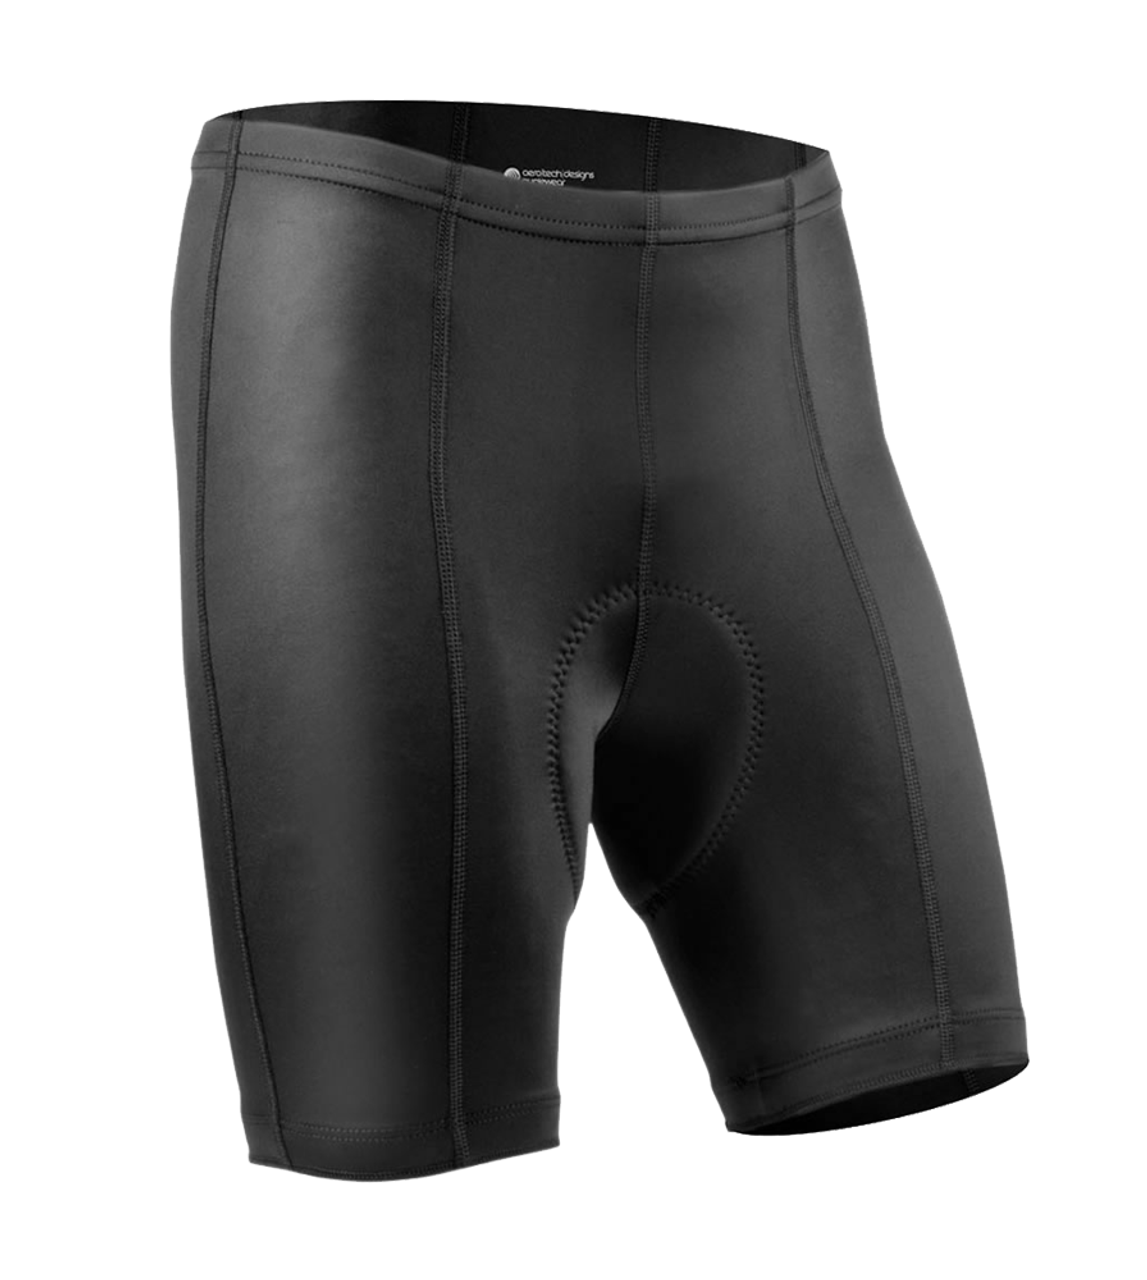 padded cycling shorts sports direct